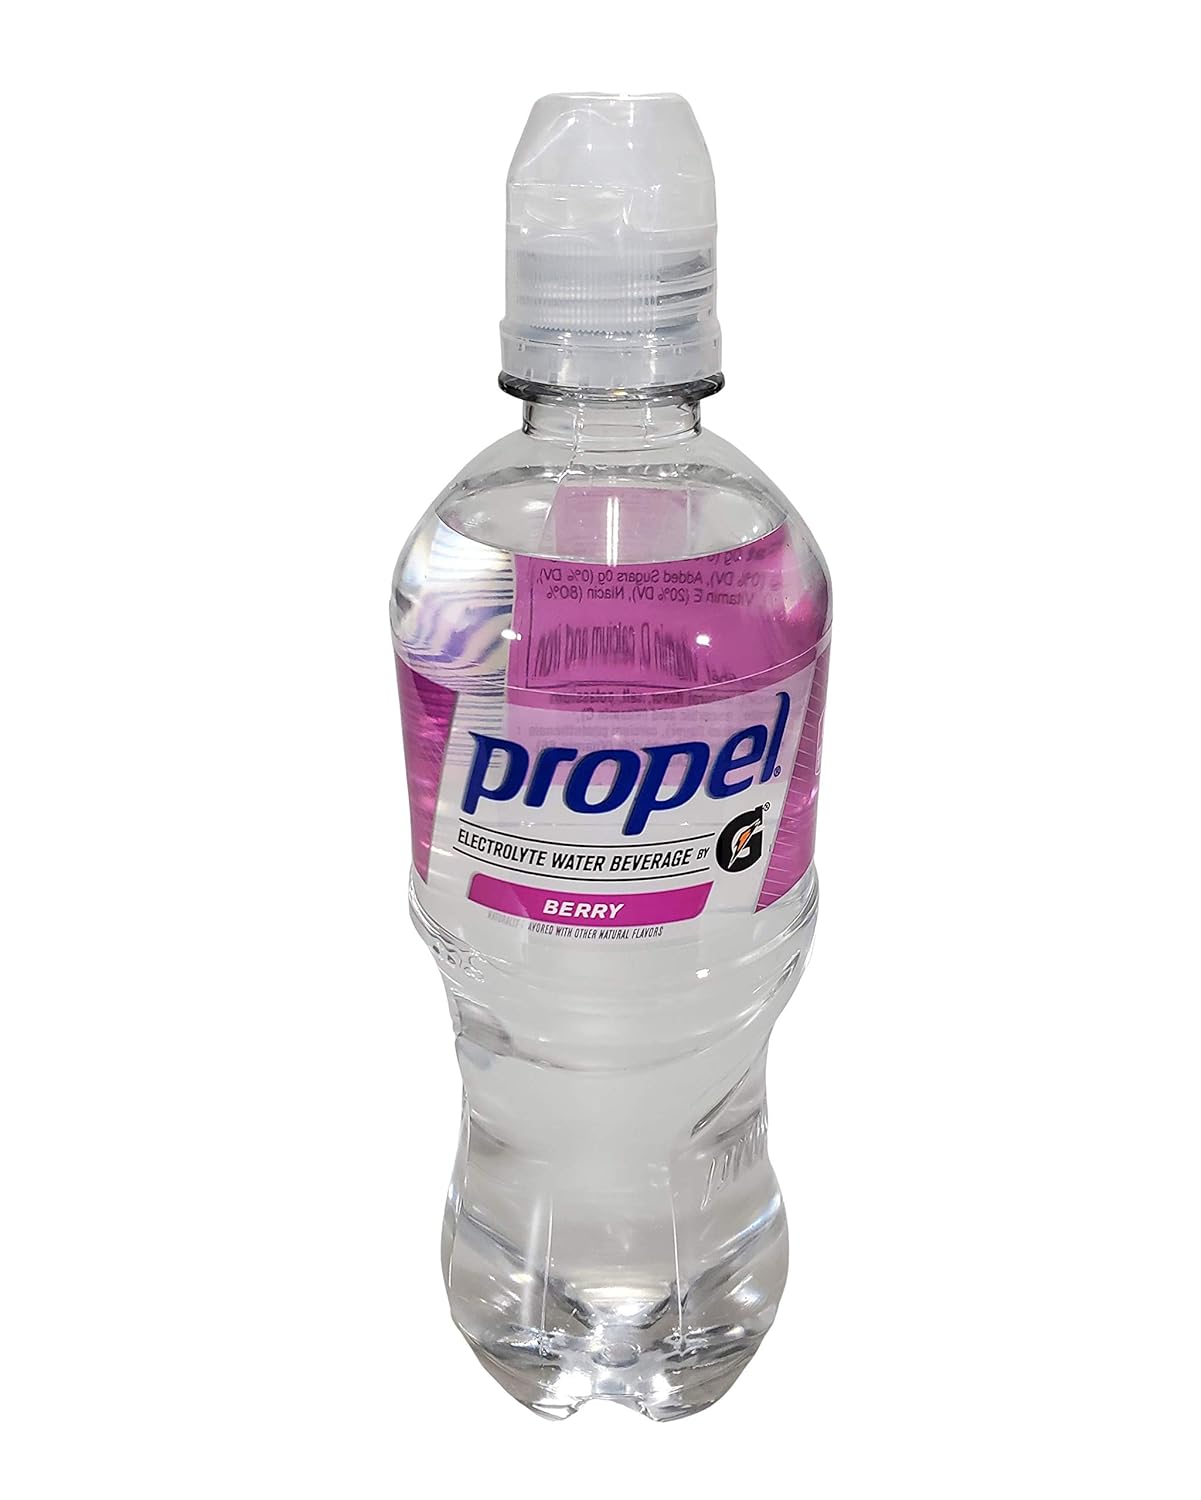 What Is In Propel Water